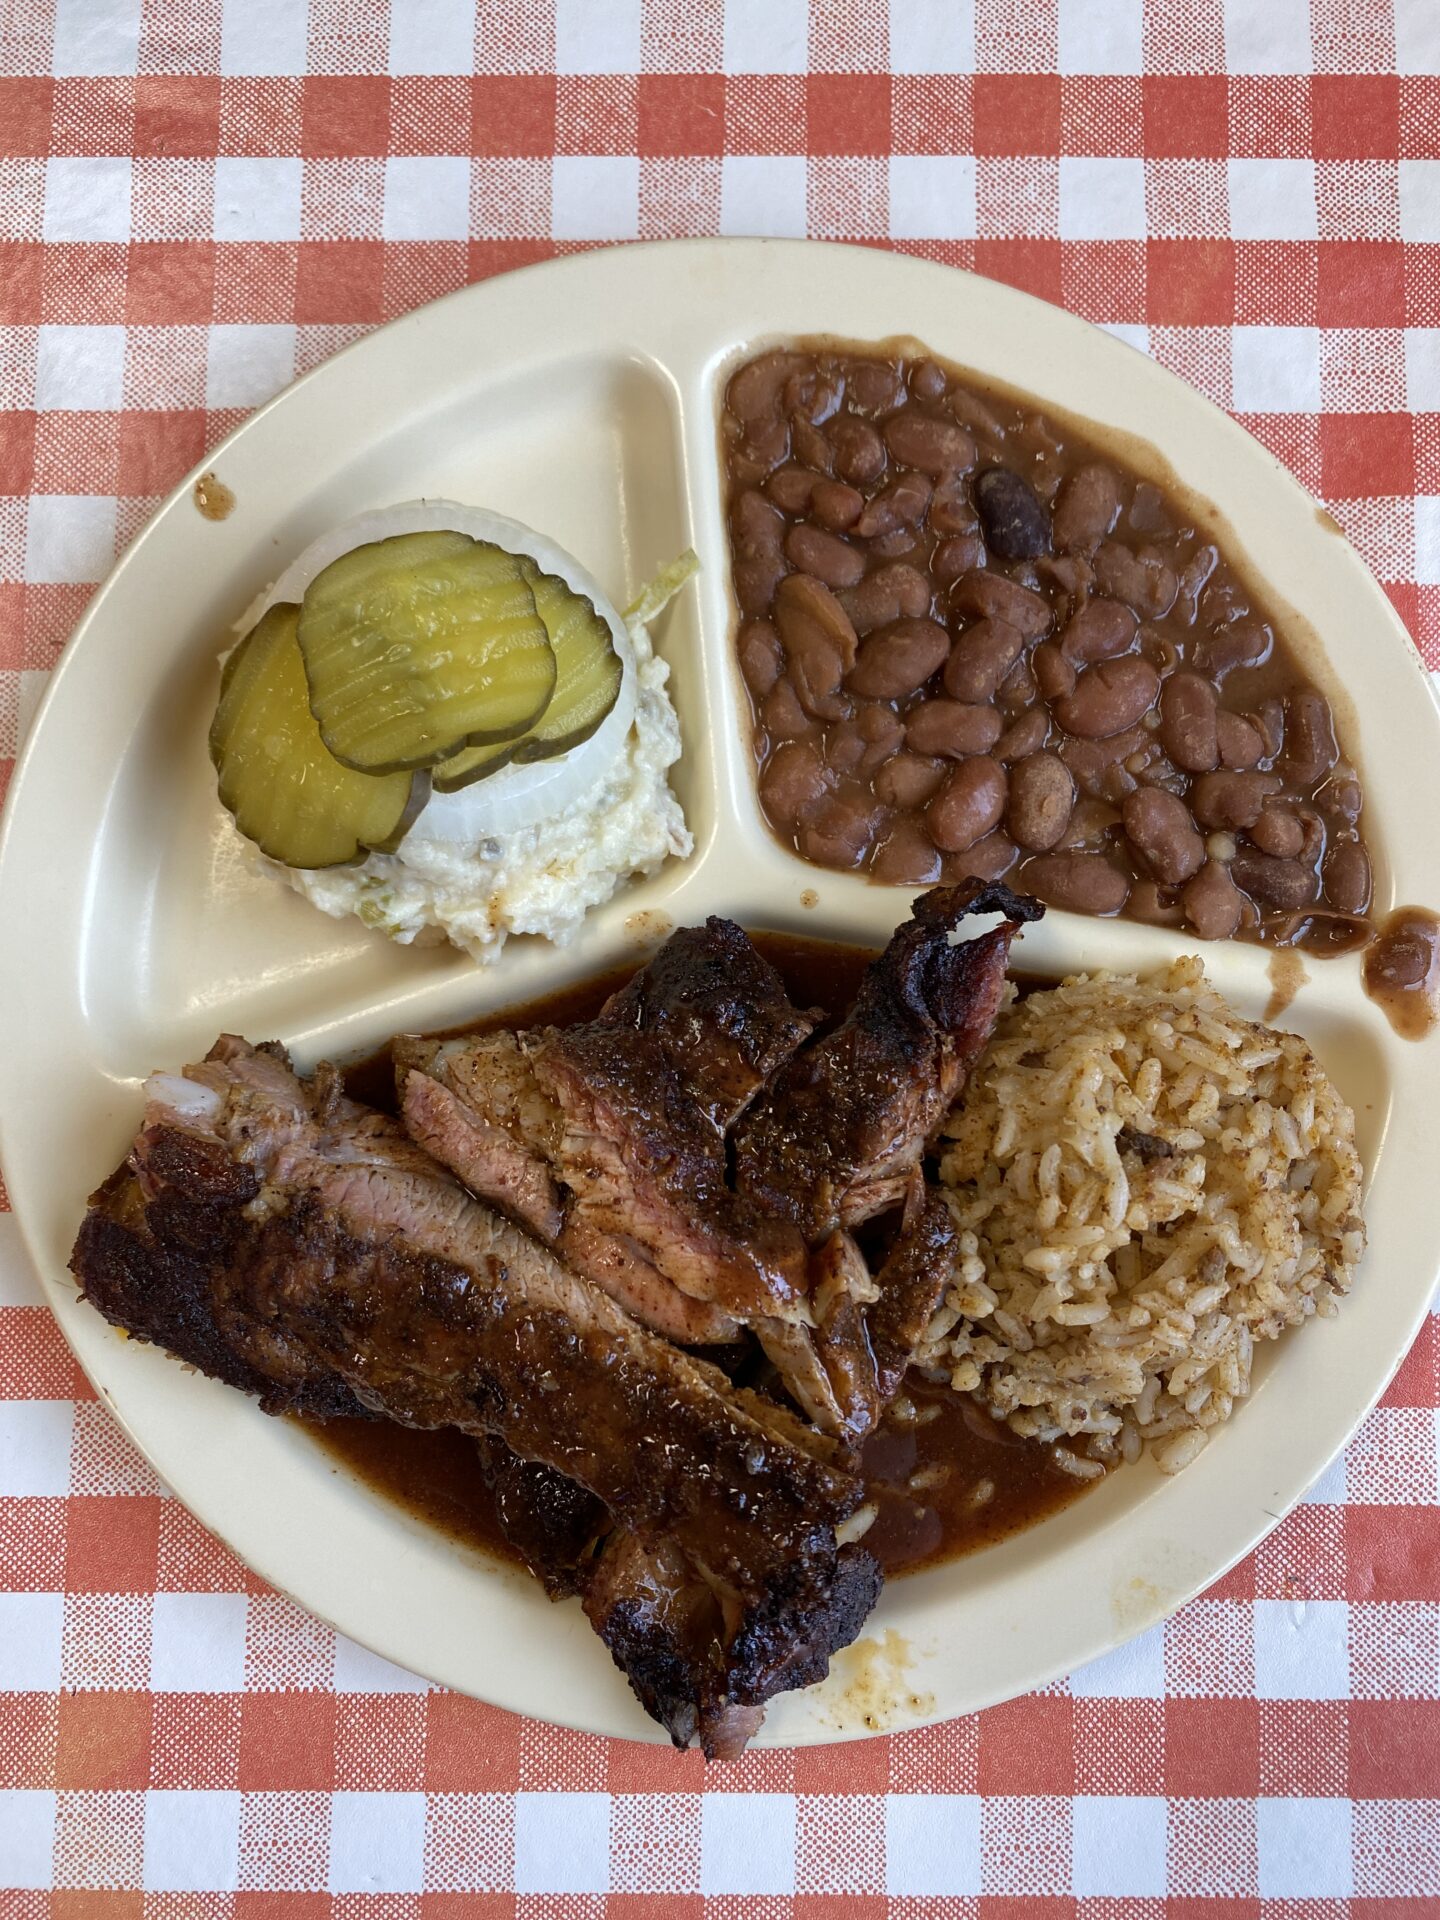 A plate of barbecue from a road trip in No Man's Land